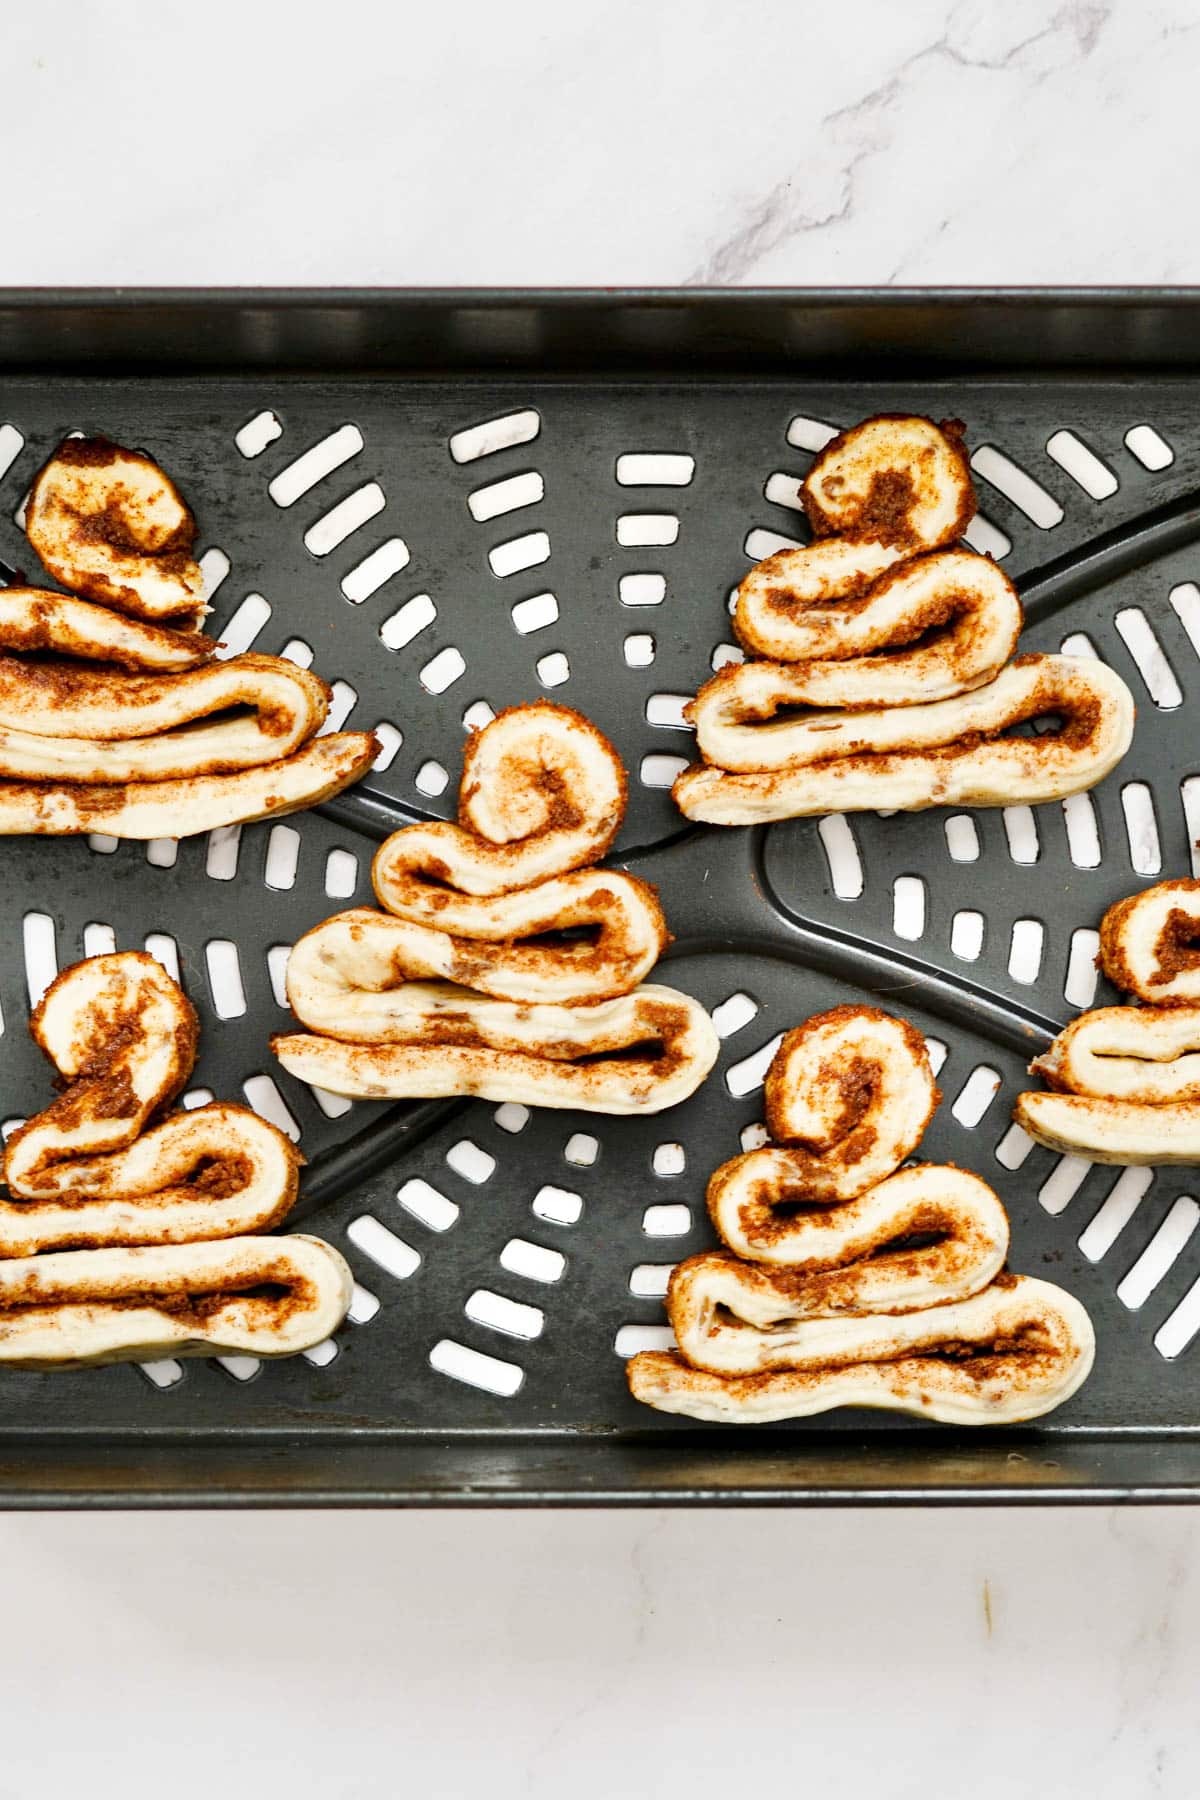 Unbaked cinnamon roll dough in the shape of Santa hats in an air fryer basket before cooking.